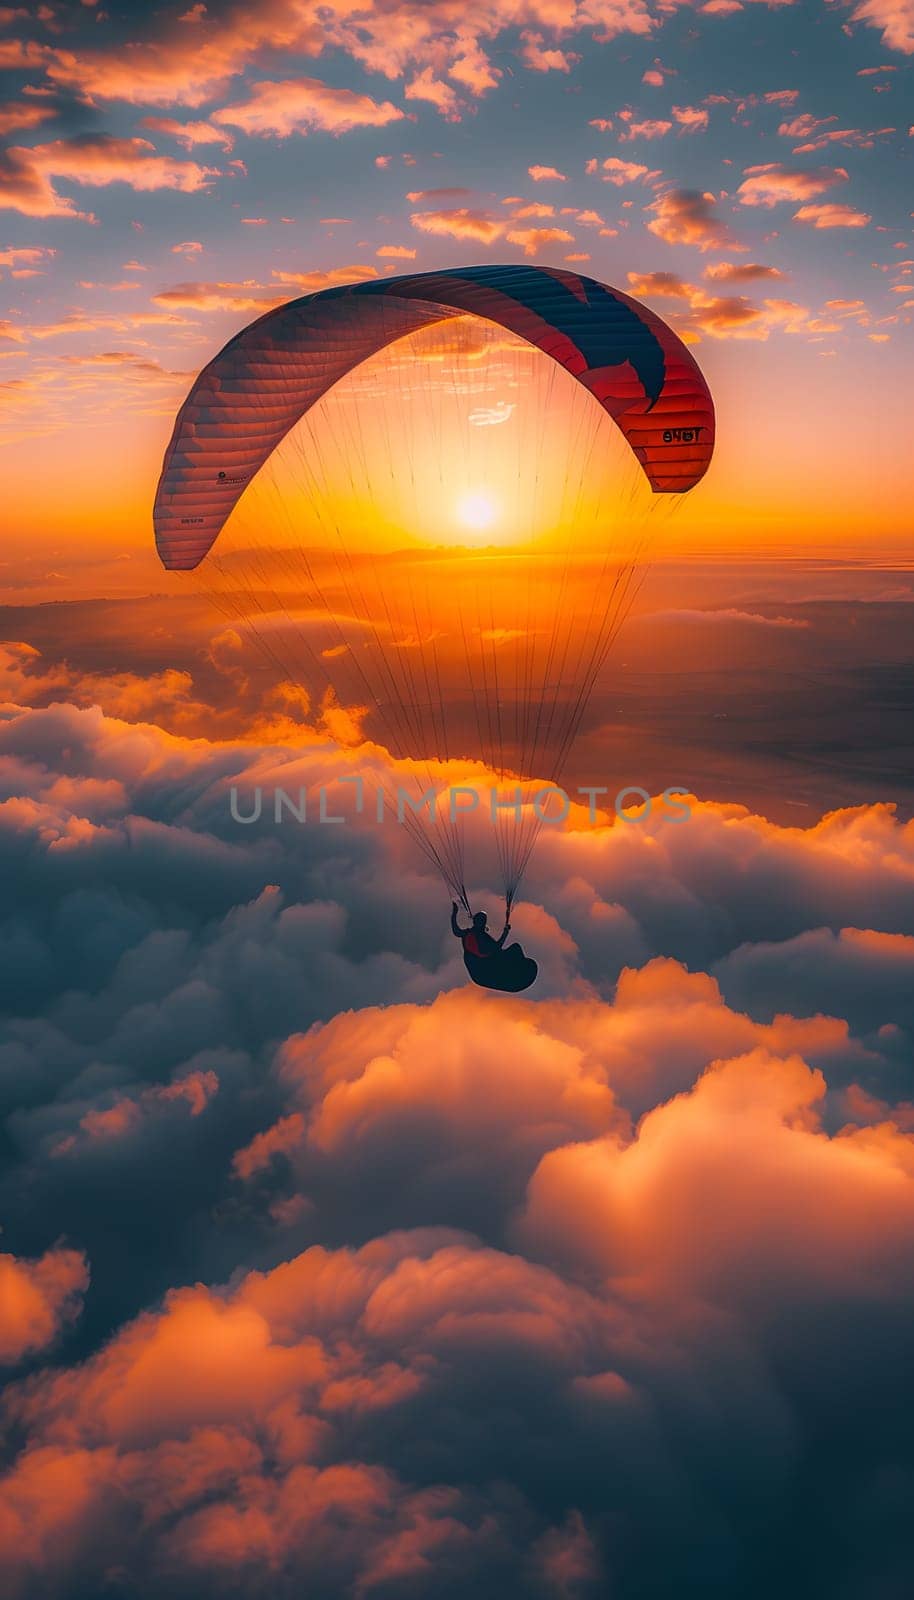 A person is soaring above the clouds while parasailing as the sky transforms into shades of orange during sunset, creating a stunning afterglow in the atmosphere